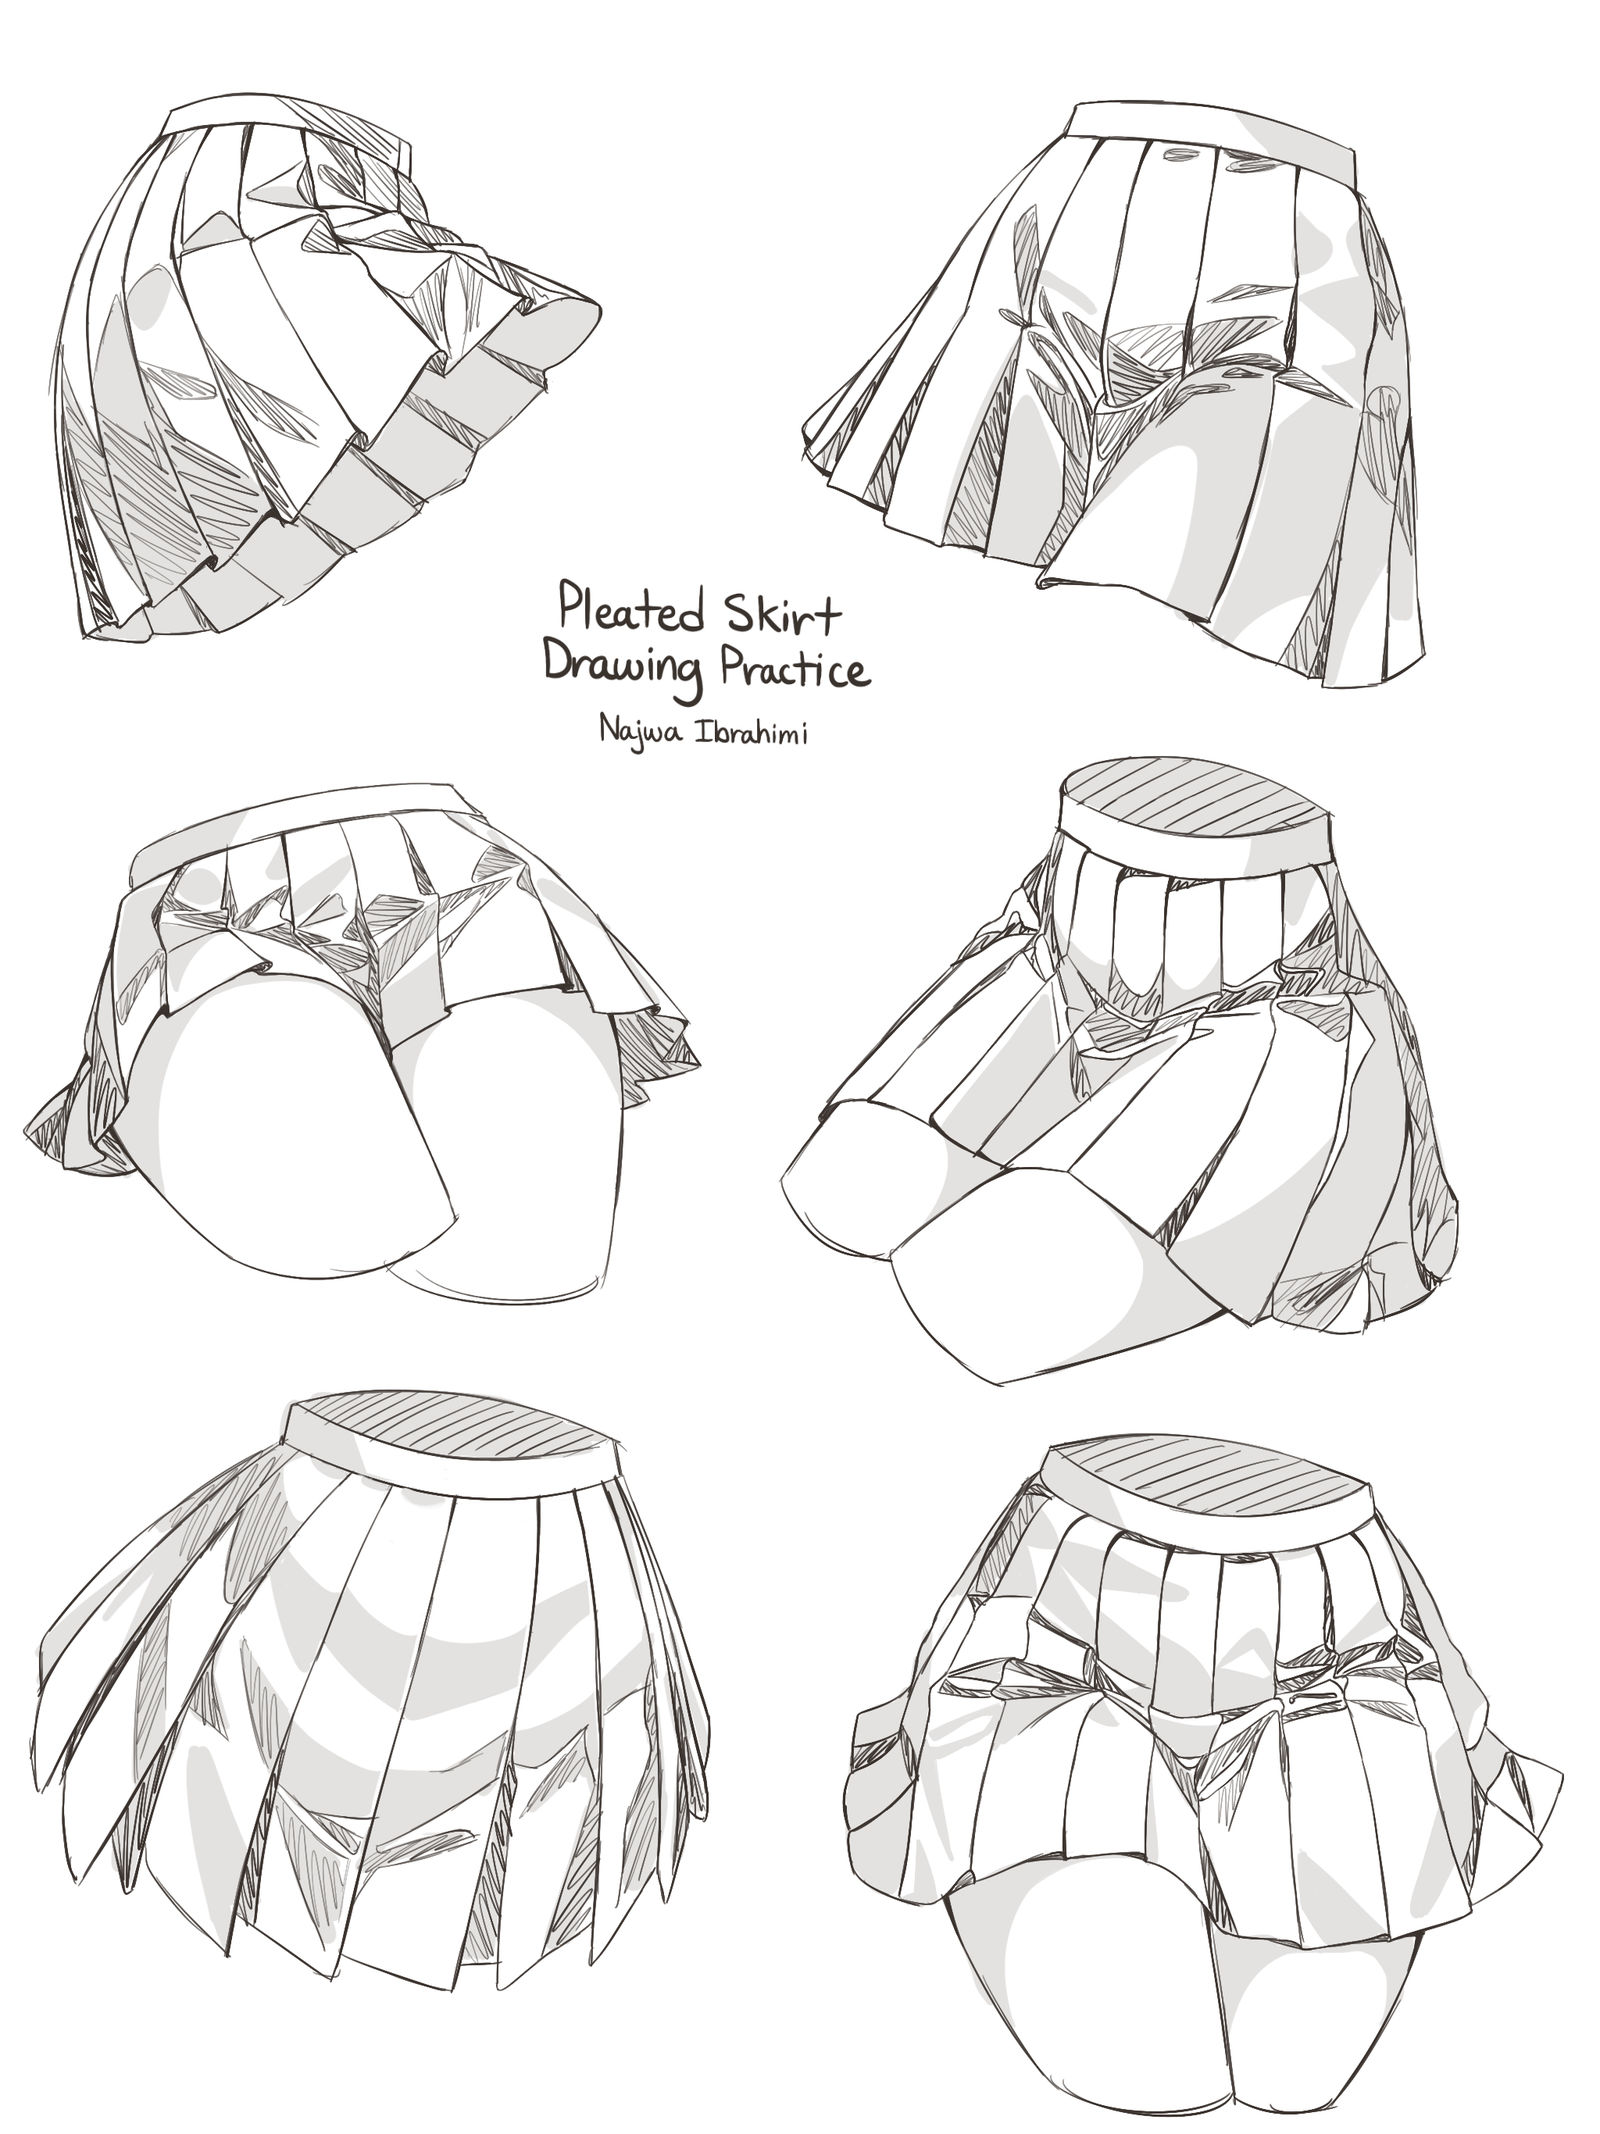 Pleated Skirt References